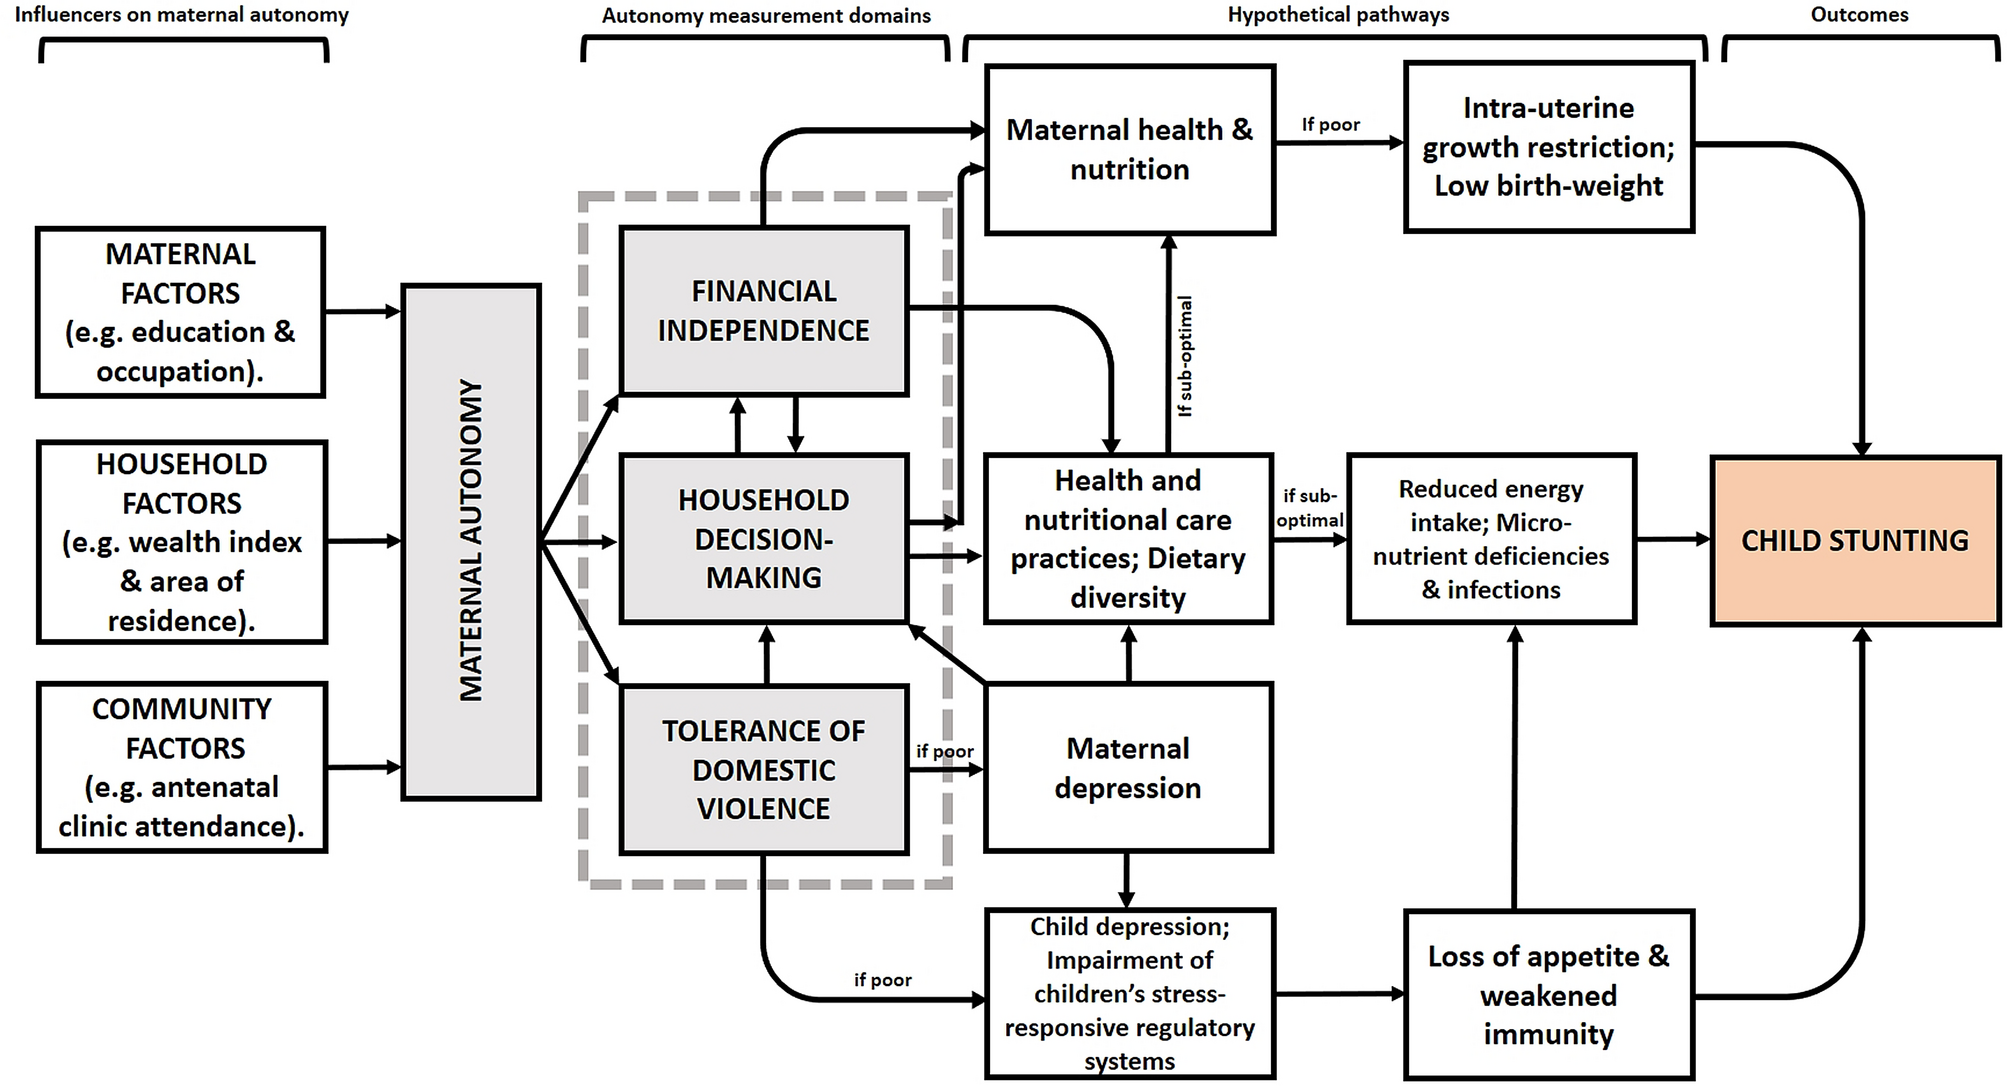 Higher maternal autonomy is associated with reduced child stunting ...